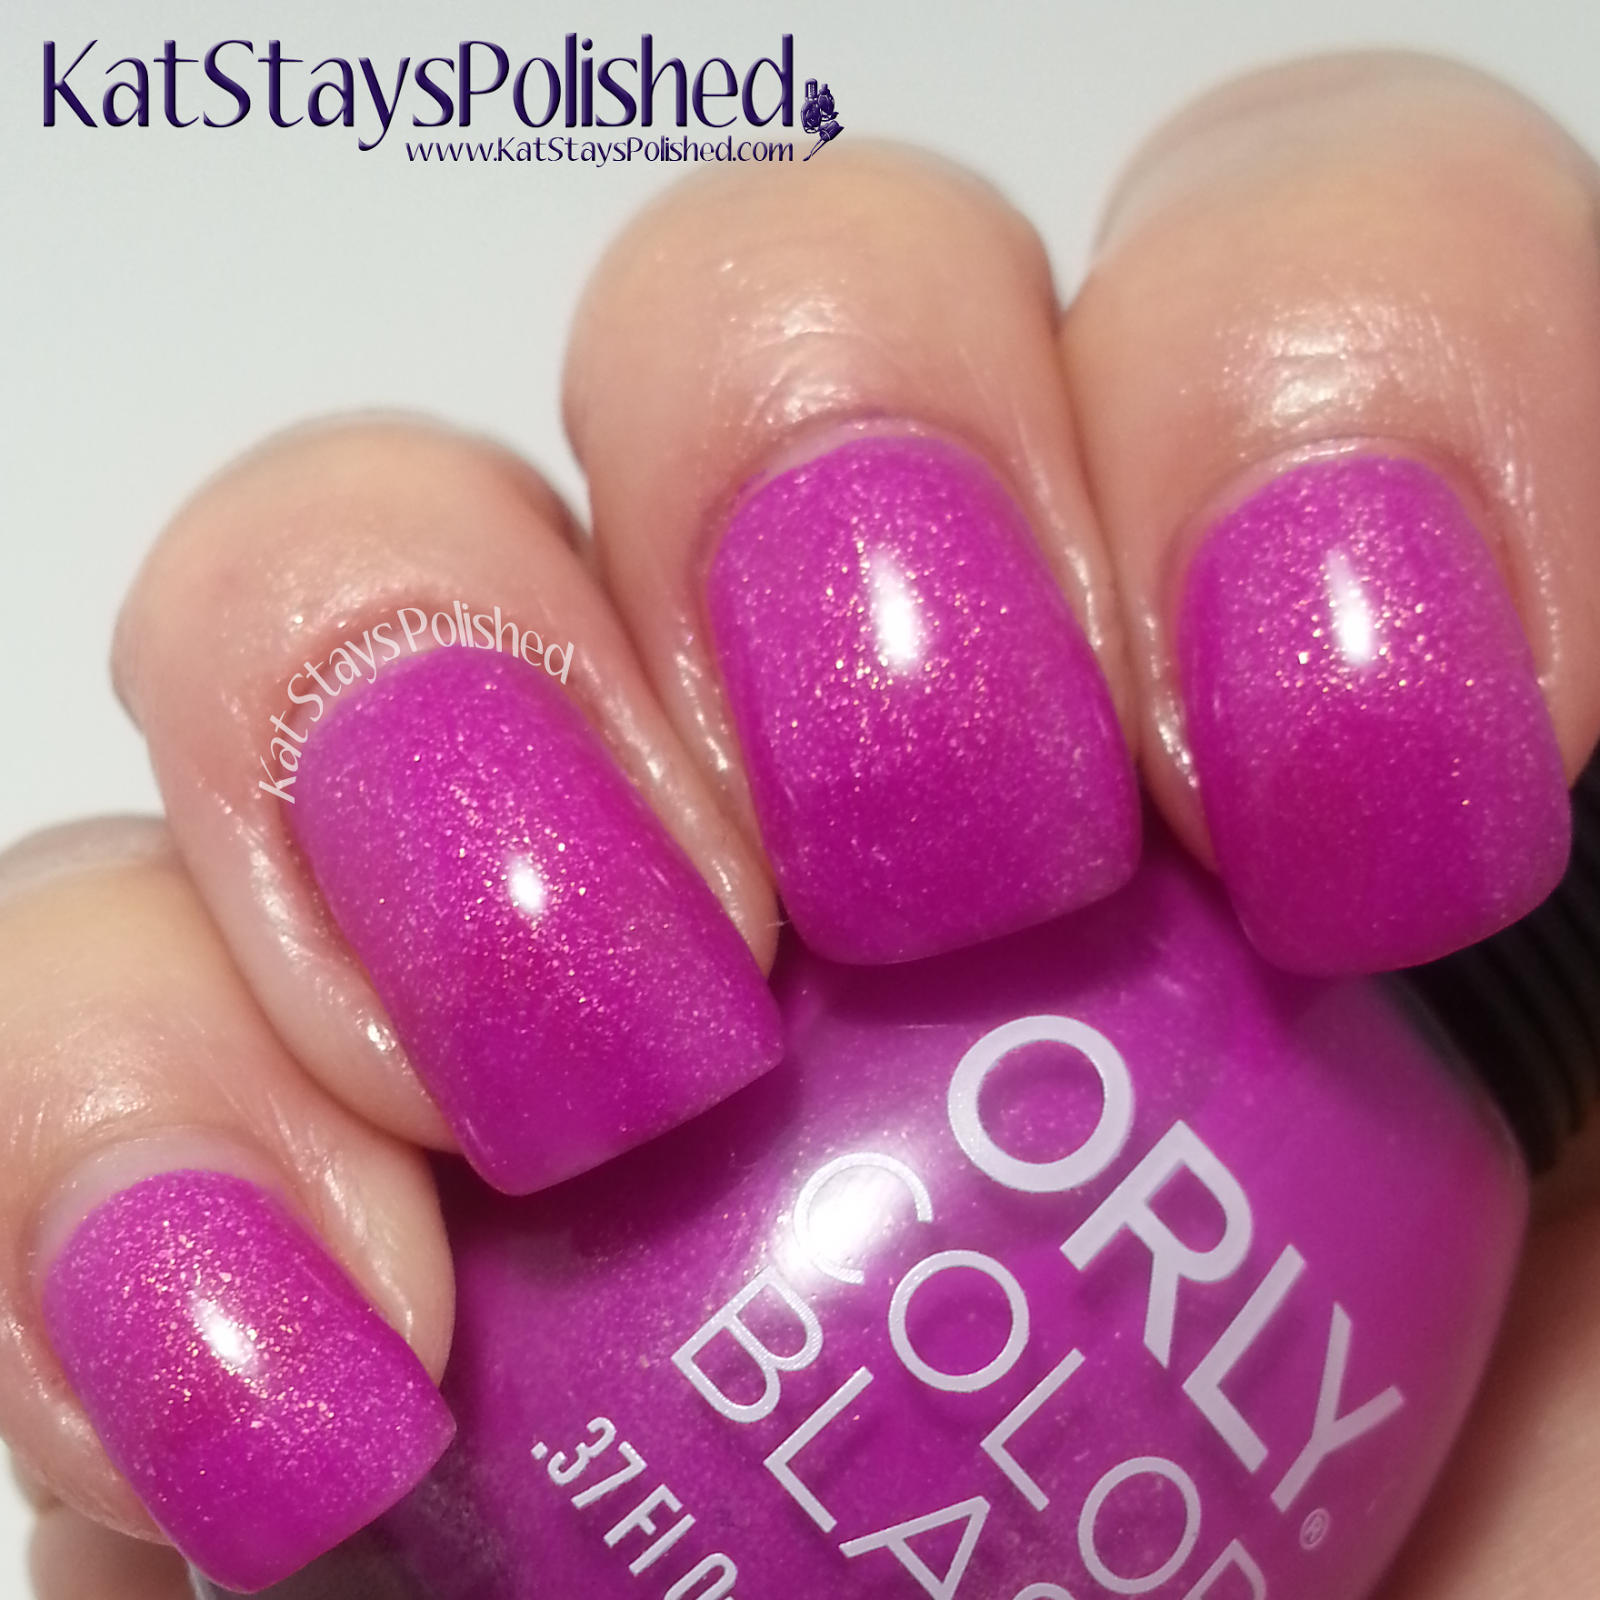 Orly Color Blast - Disney's Frozen Elsa Collection - Watch Out, Or Elsa! | Kat Stays Polished